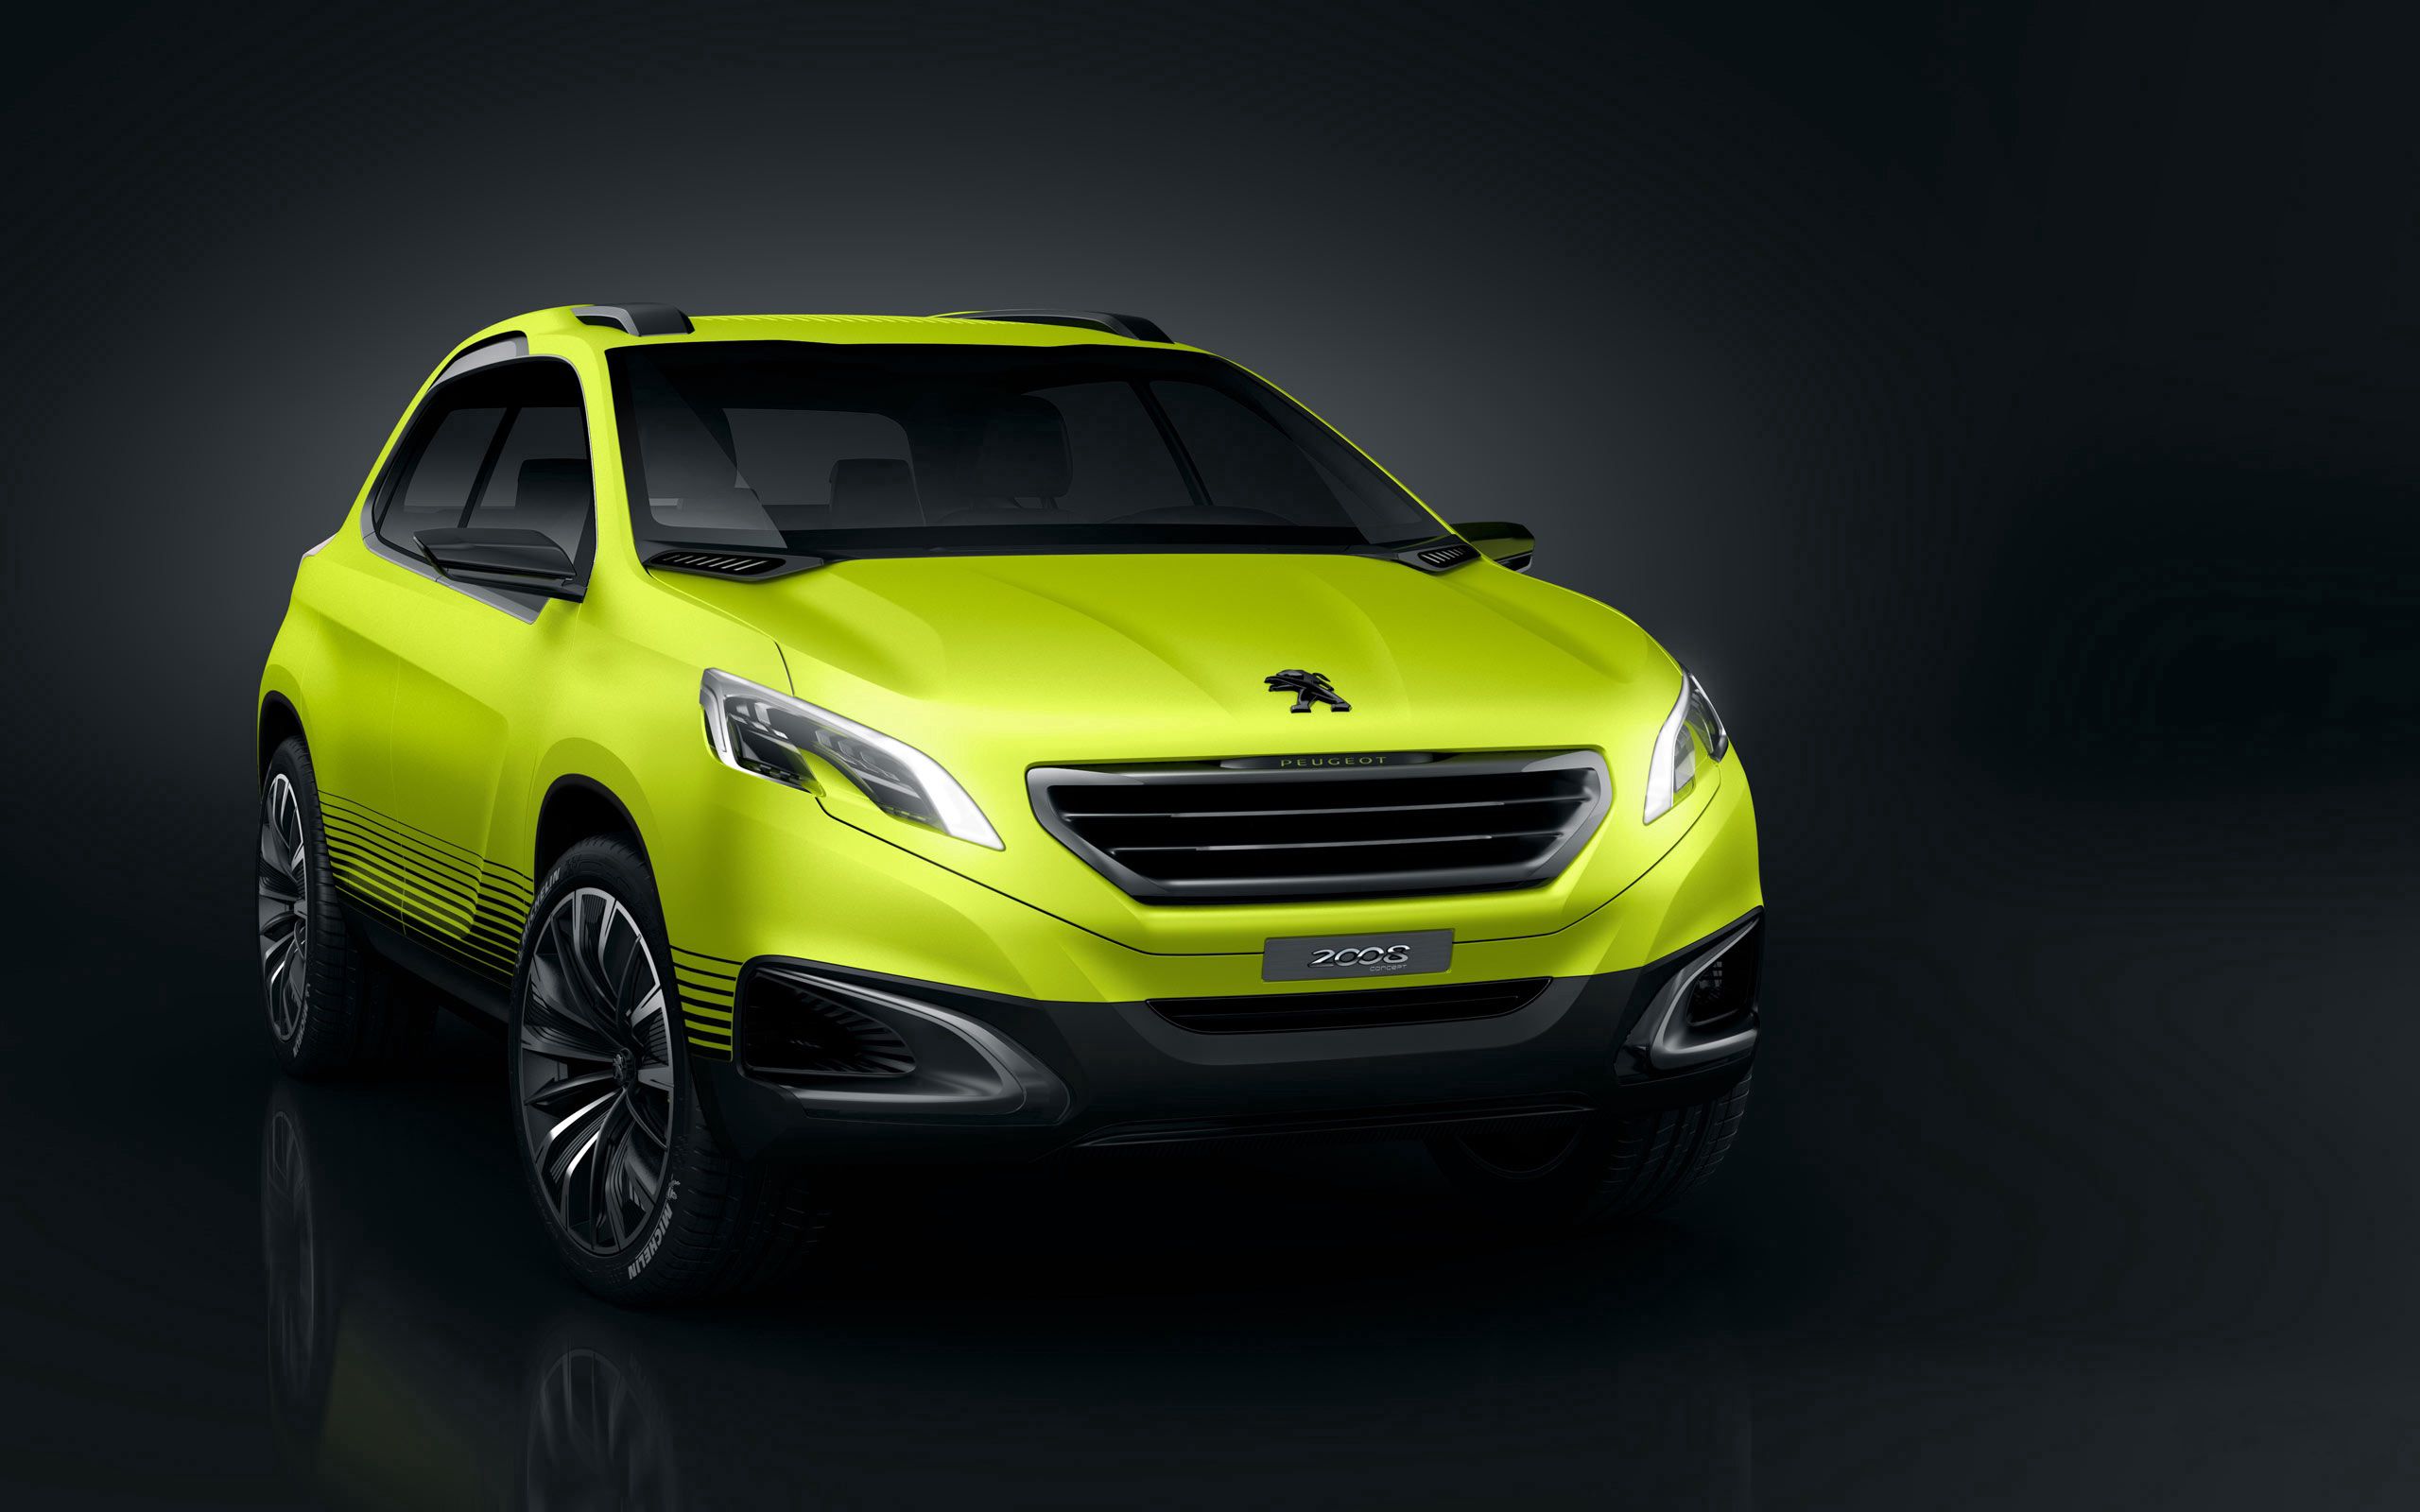 peugeot, cars, front view, peugeot 2008 Smartphone Background